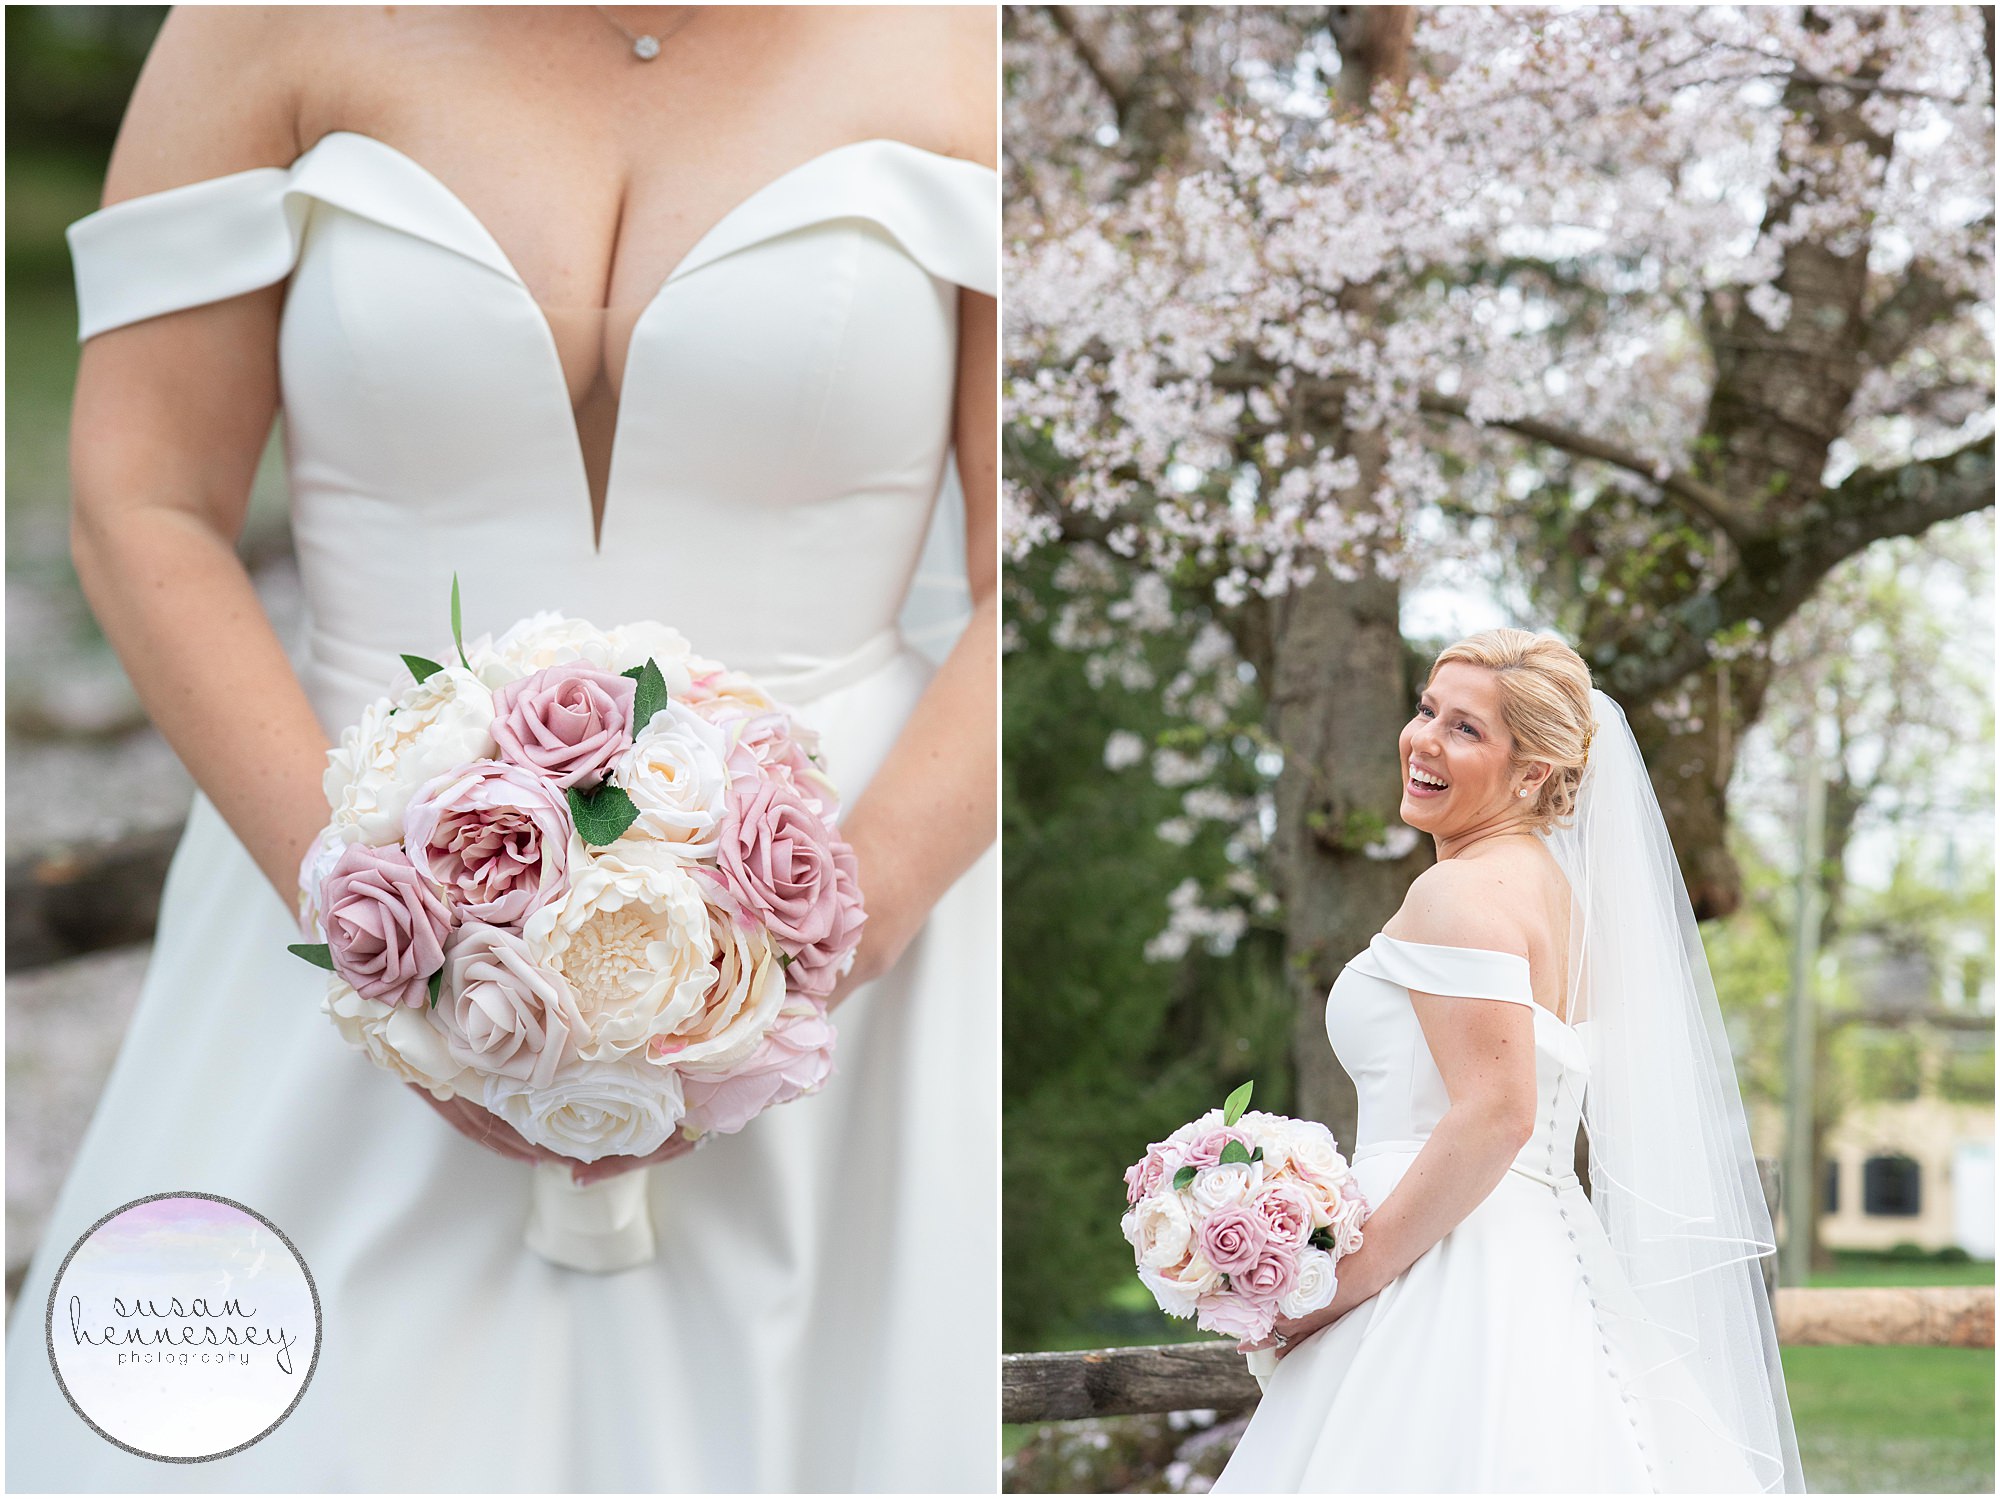 Planning a Micro Wedding? Erica and Alex had a dusty pink color scheme that was perfect for a Spring wedding.